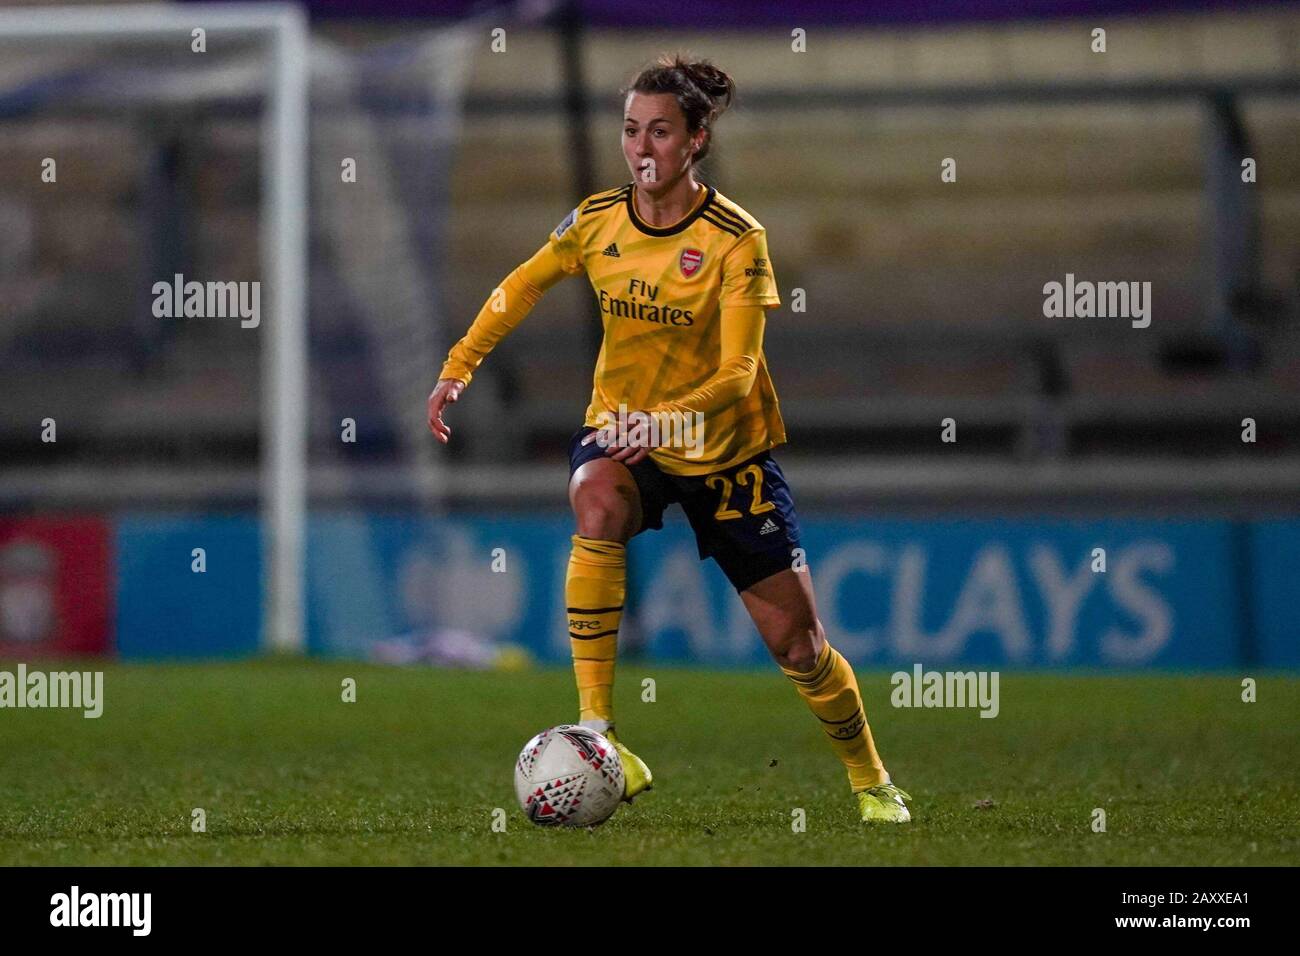 CHESTER. ENGLAND. FEB 13th: Viktoria Schnaderbeck of Arsenal in action  during the Women’s Super League game between Liverpool Women and Arsenal Women at The Deva Stadium in Chester, England. (Photo by Daniela Porcelli/SPP) Stock Photo